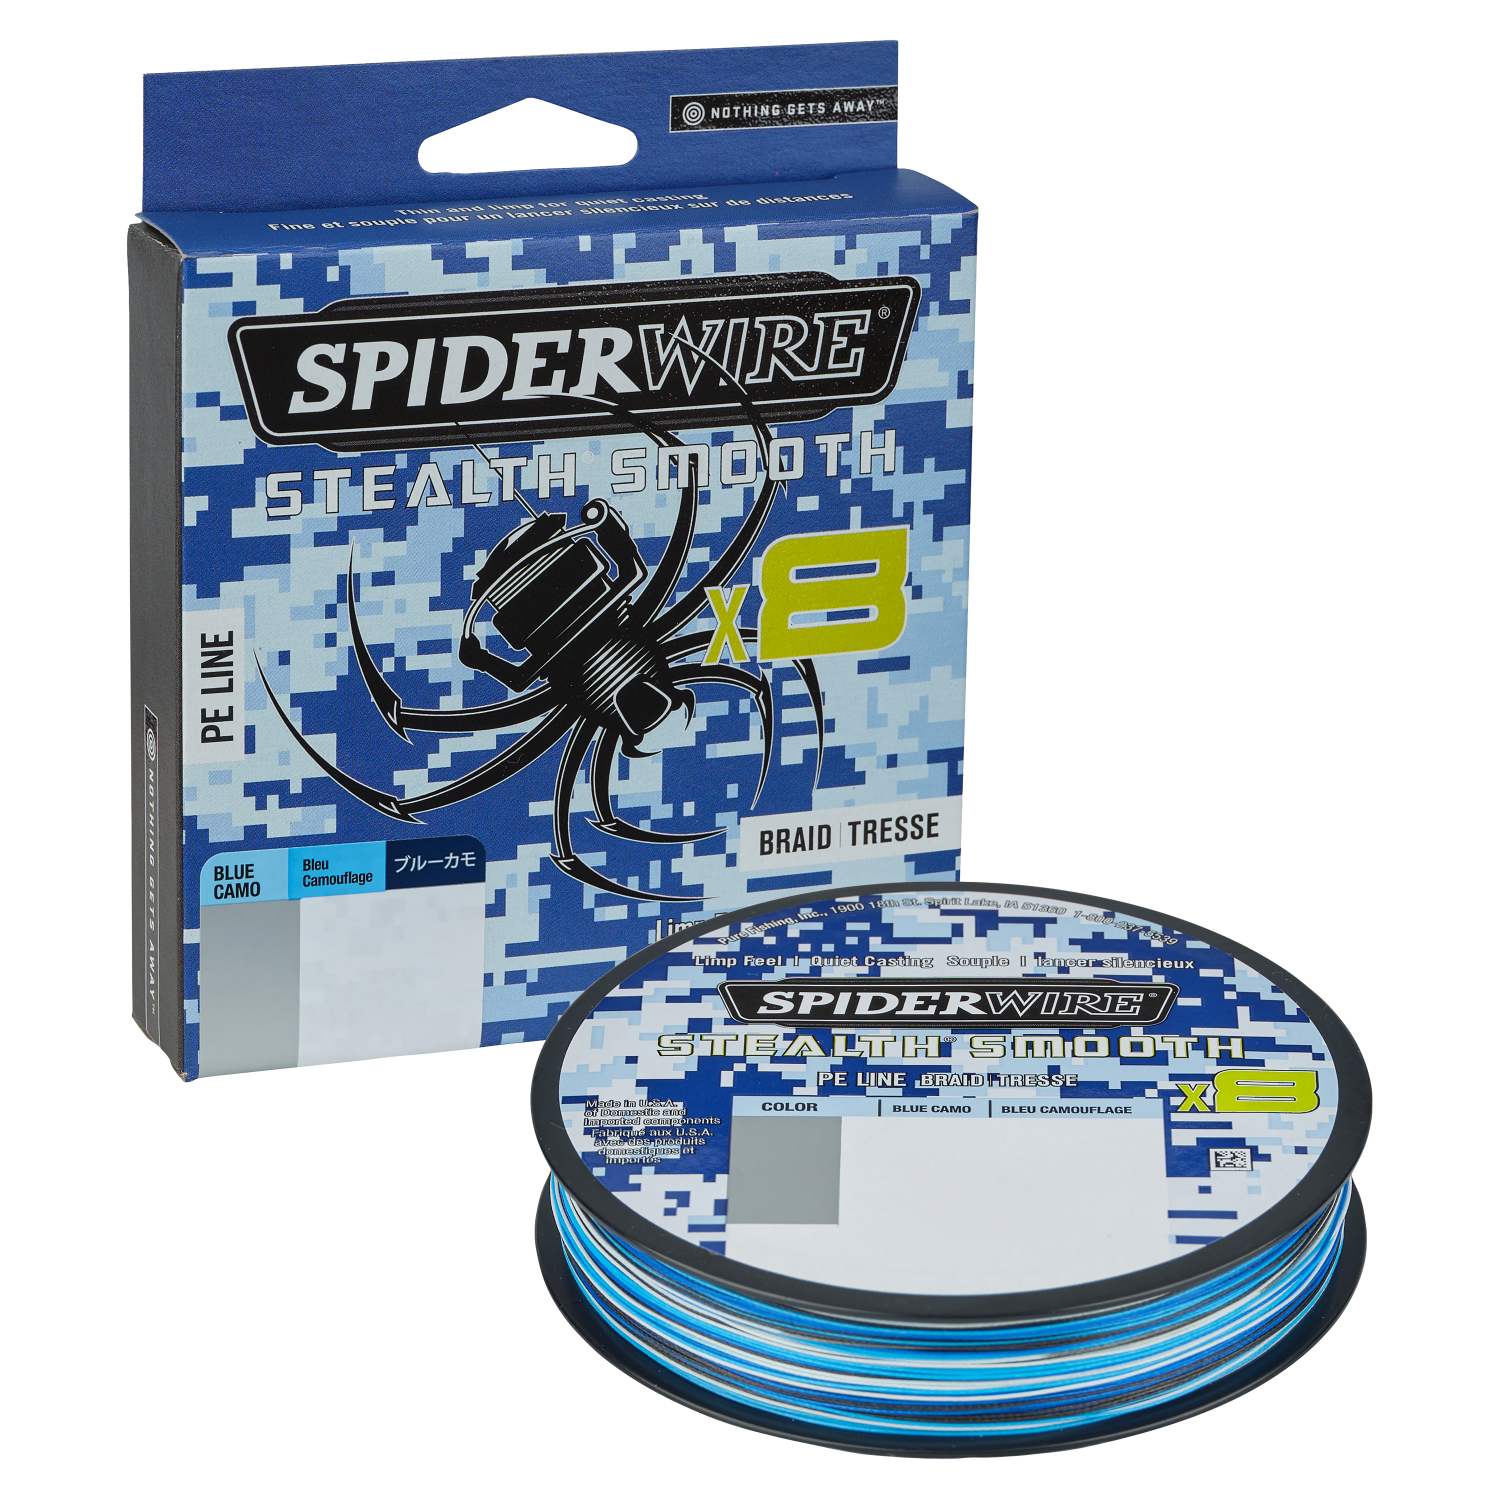 Spiderwire Smooth8 Fishing Line, yellow